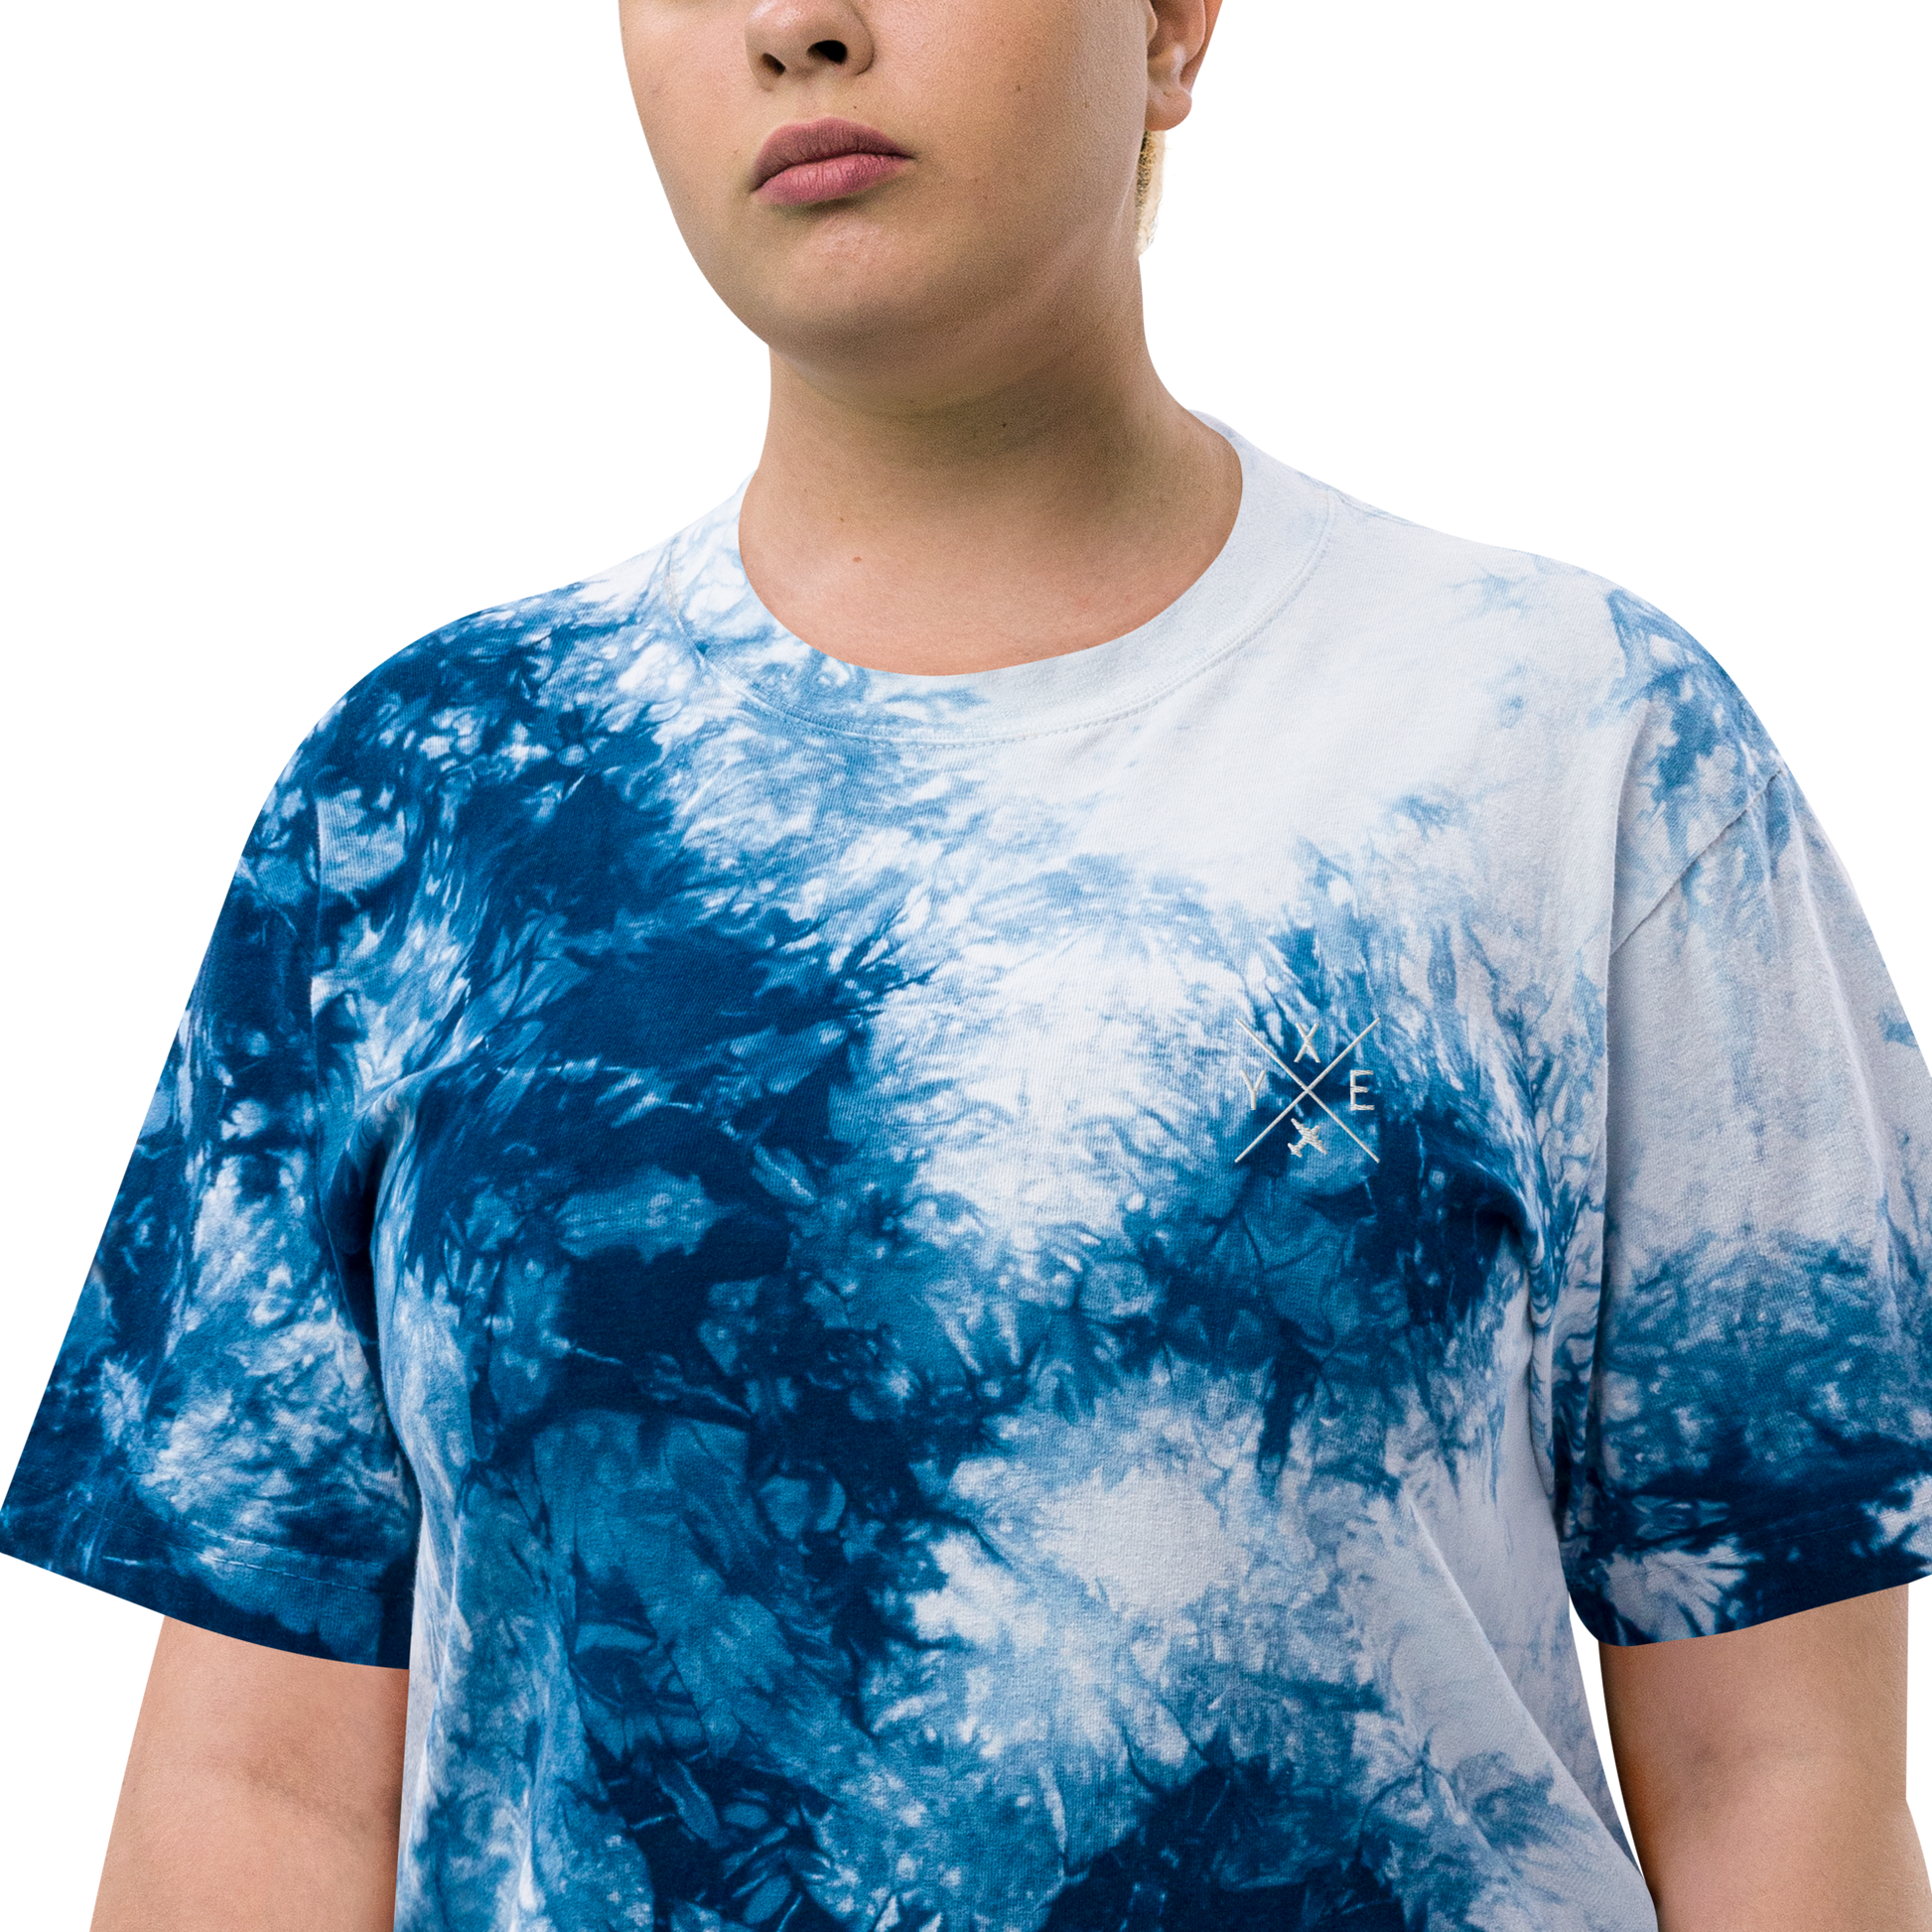 YHM Designs - YXE Saskatoon Oversized Tie-Dye T-Shirt - Crossed-X Design with Airport Code and Vintage Propliner - White Embroidery - Image 10